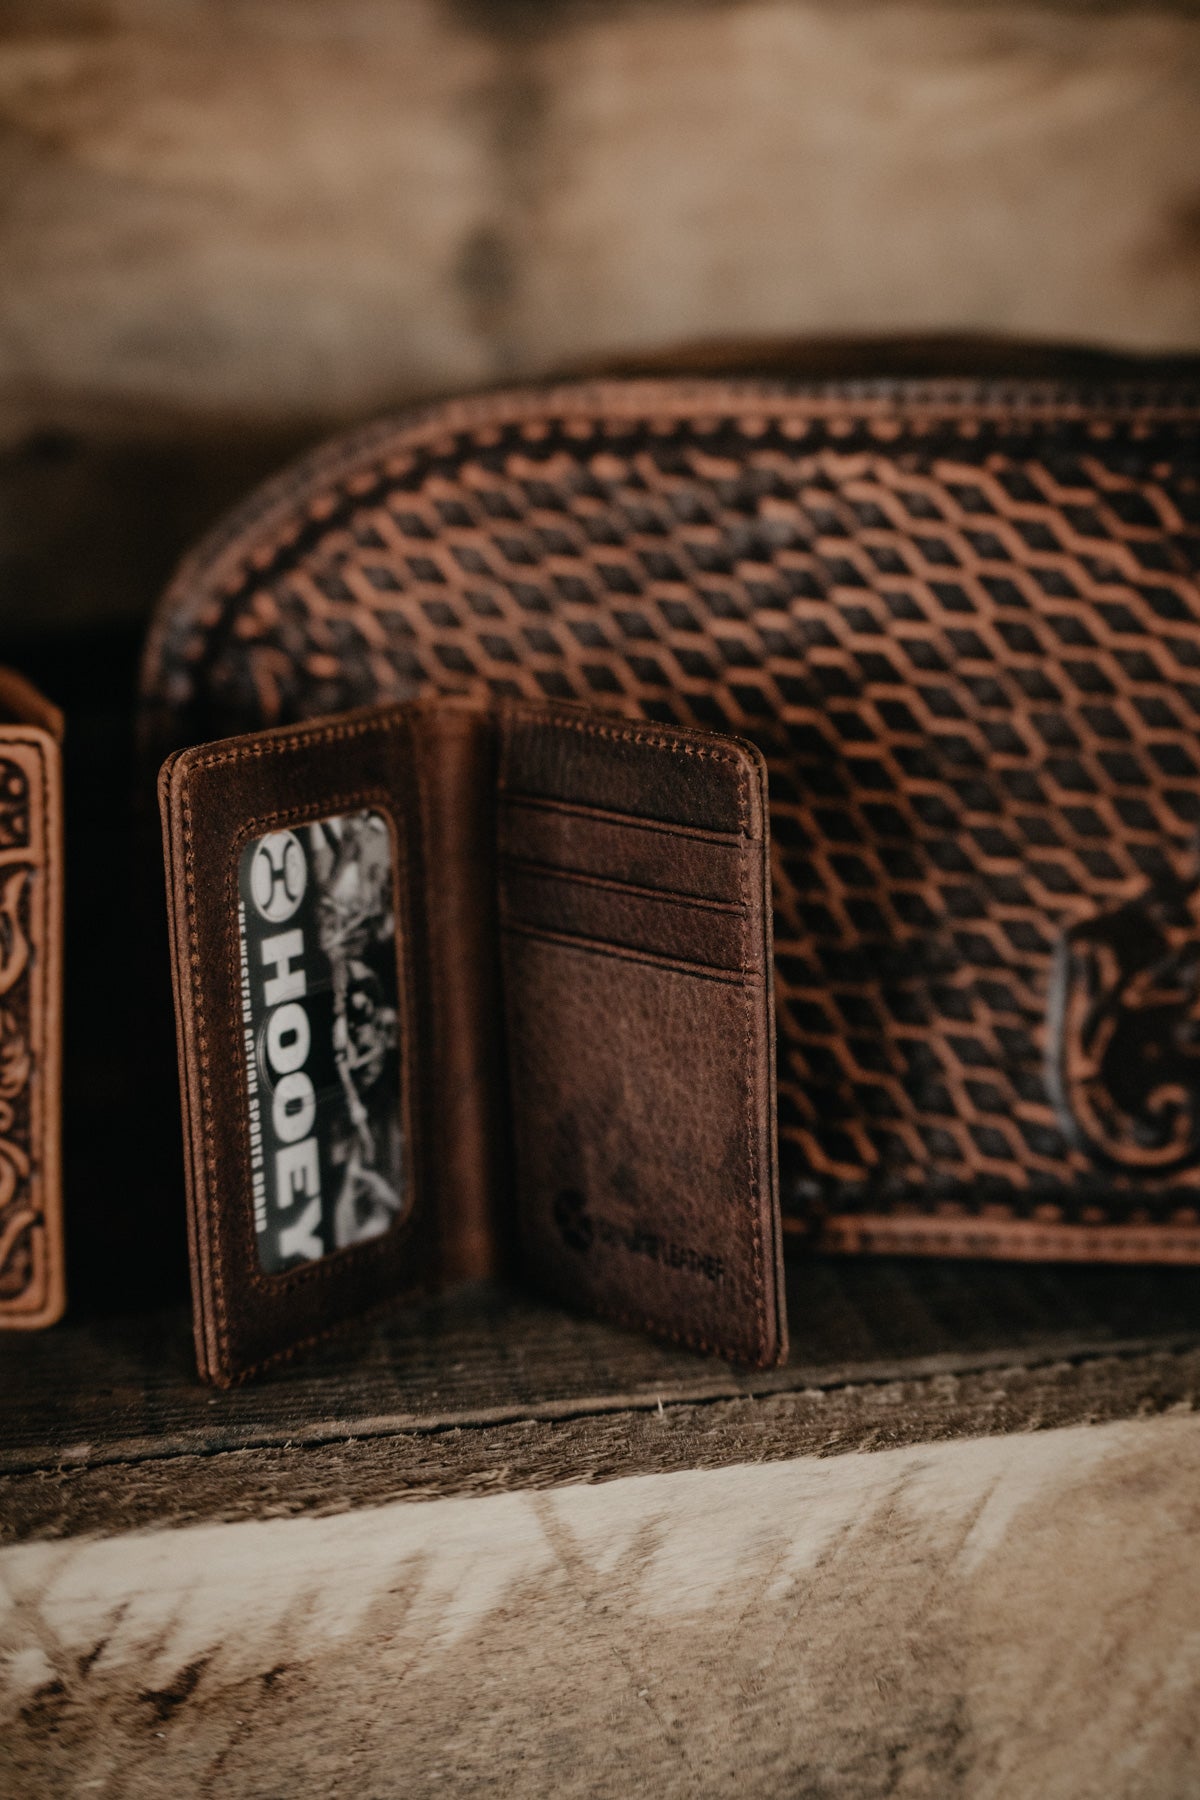 'Grayson' Hooey Distressed Brown Bifold Money Clip Wallet with Tooled Leather Overlay